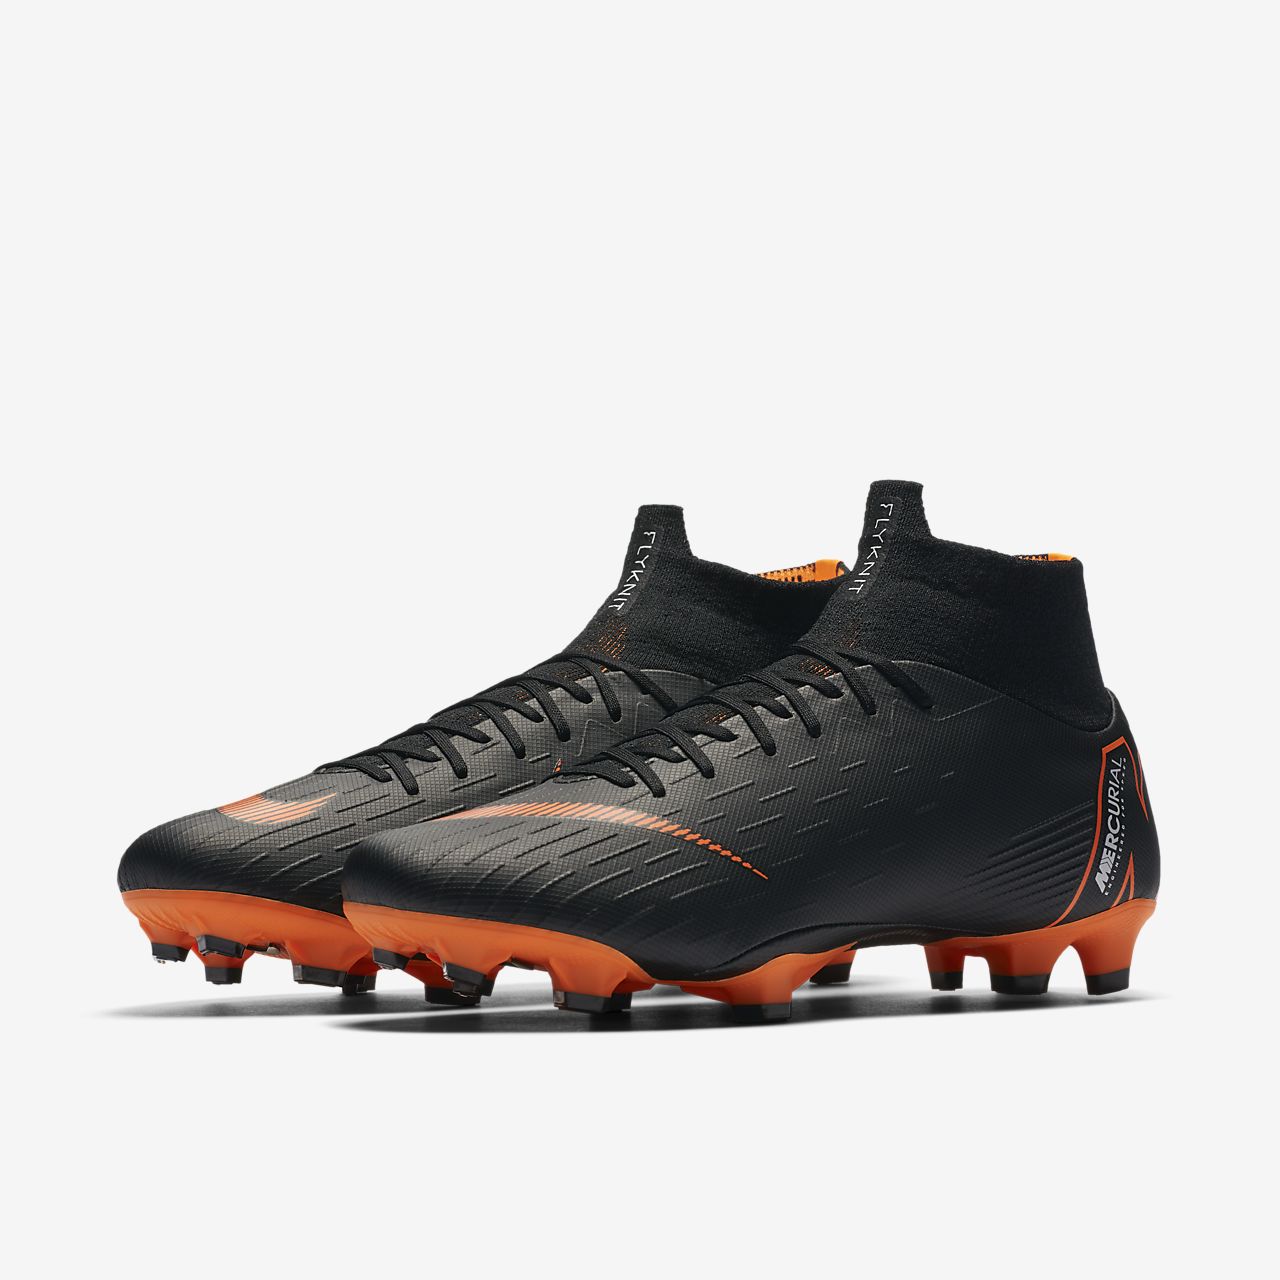 Nike Mercurial Superfly VI Pro FG from 99.90 Compare.